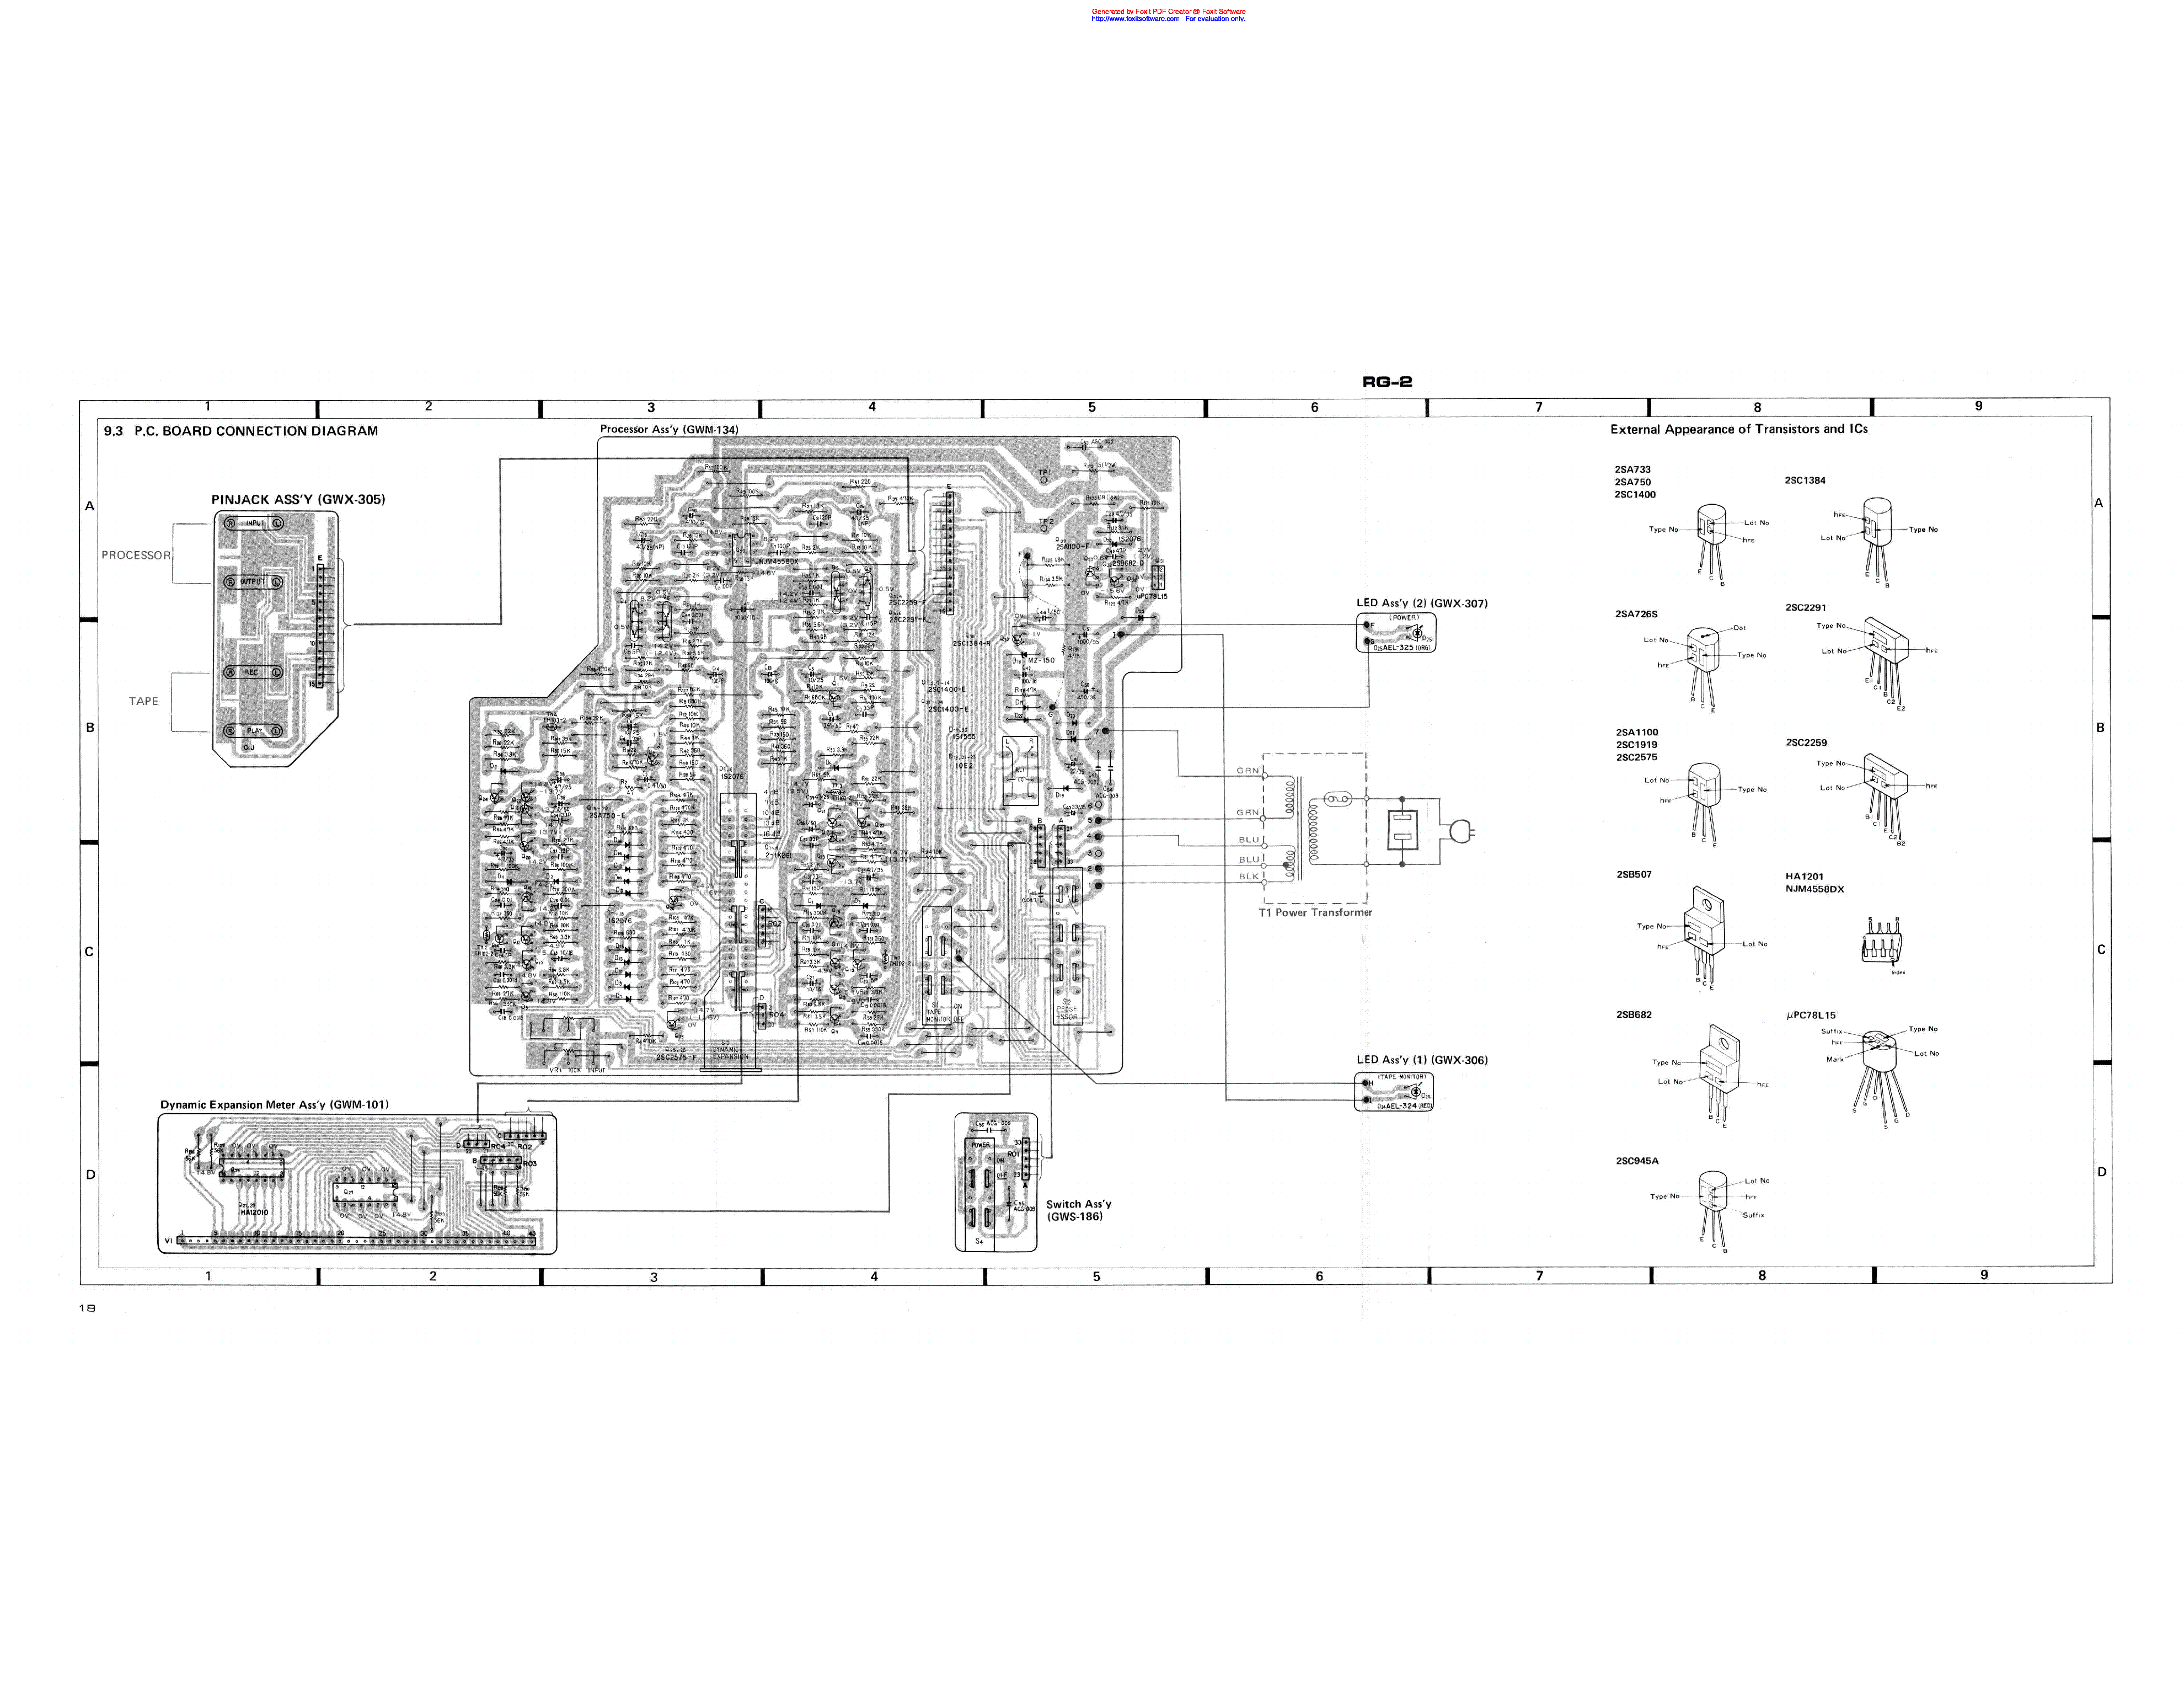 PIONEER RG-2 SCH service manual (2nd page)